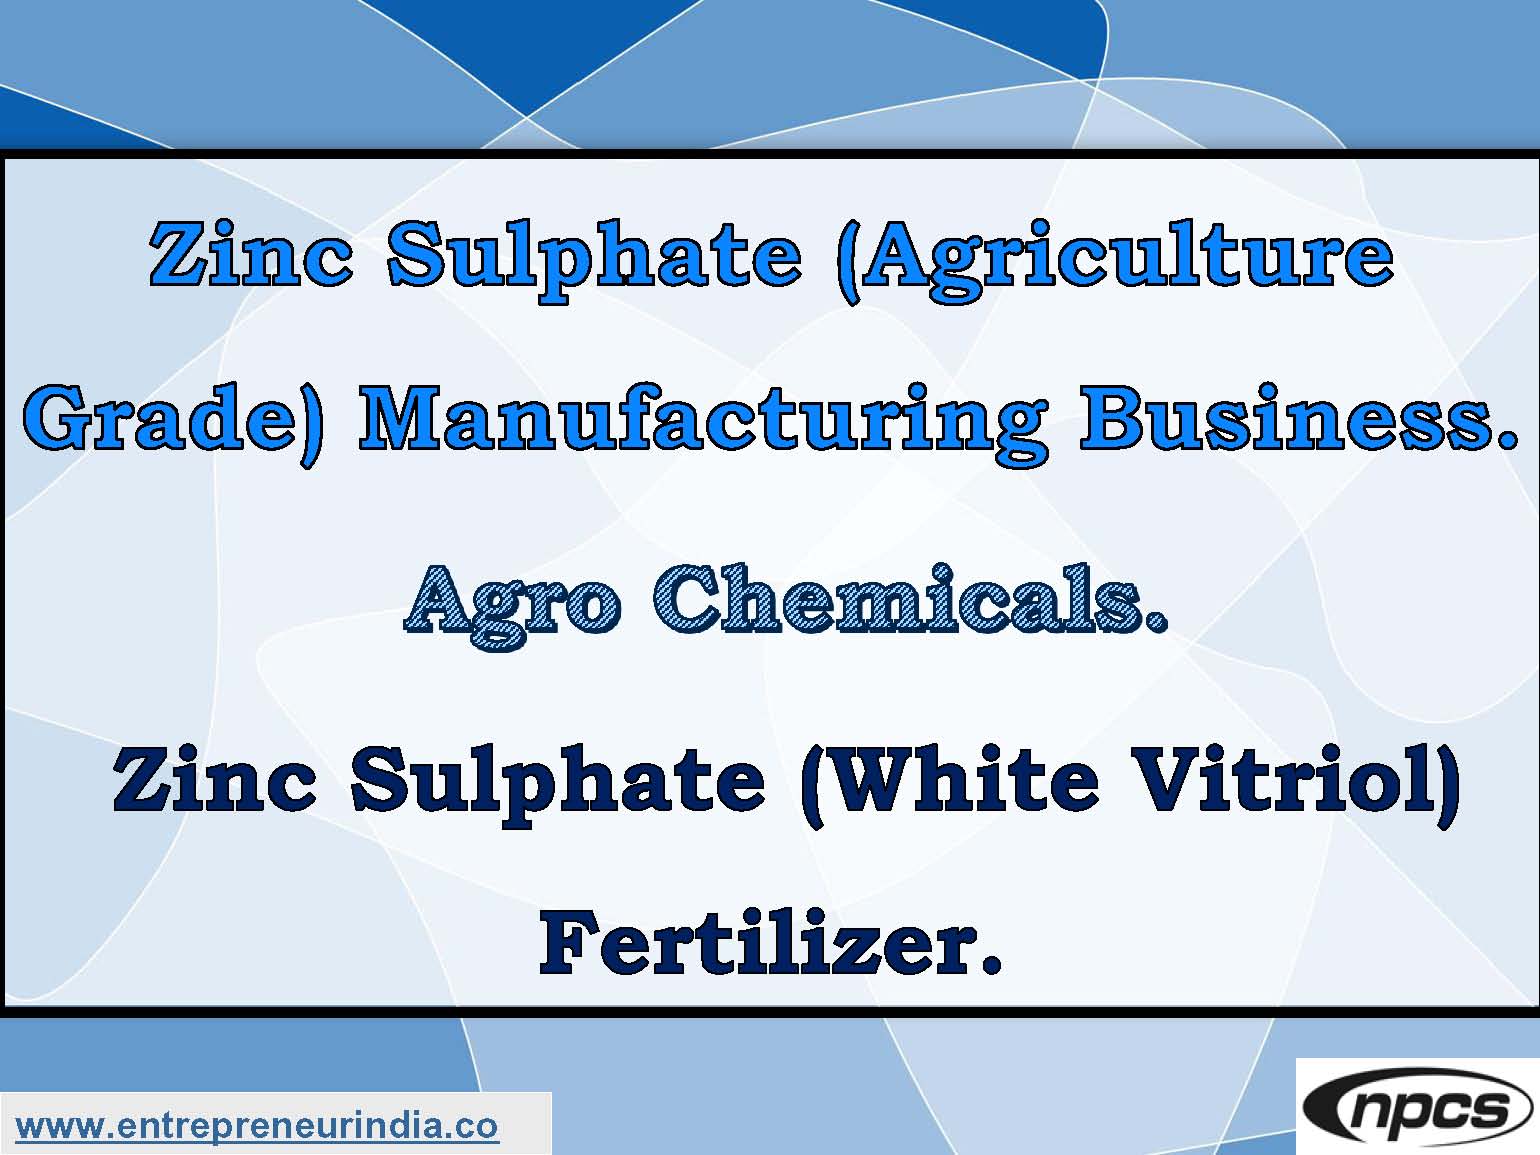 Zinc Sulphate (Agriculture Grade) Manufacturing Business